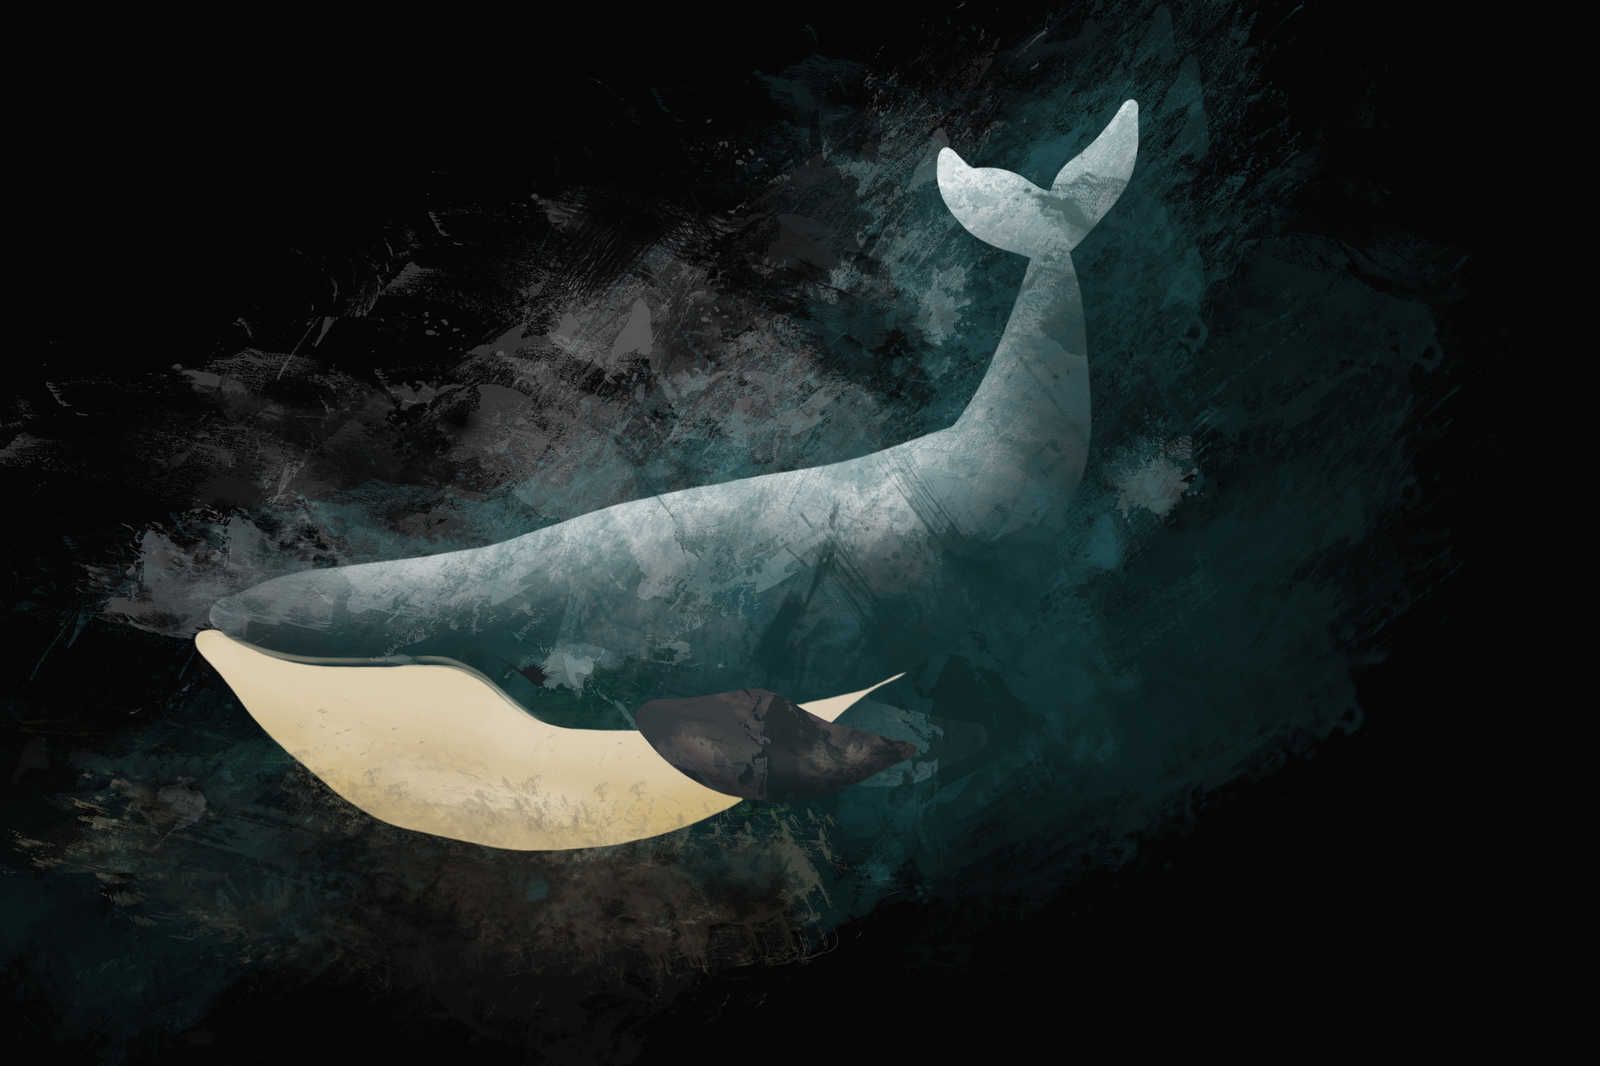             Black Canvas Painting with Whale in Sign Design - 1.20 m x 0.80 m
        